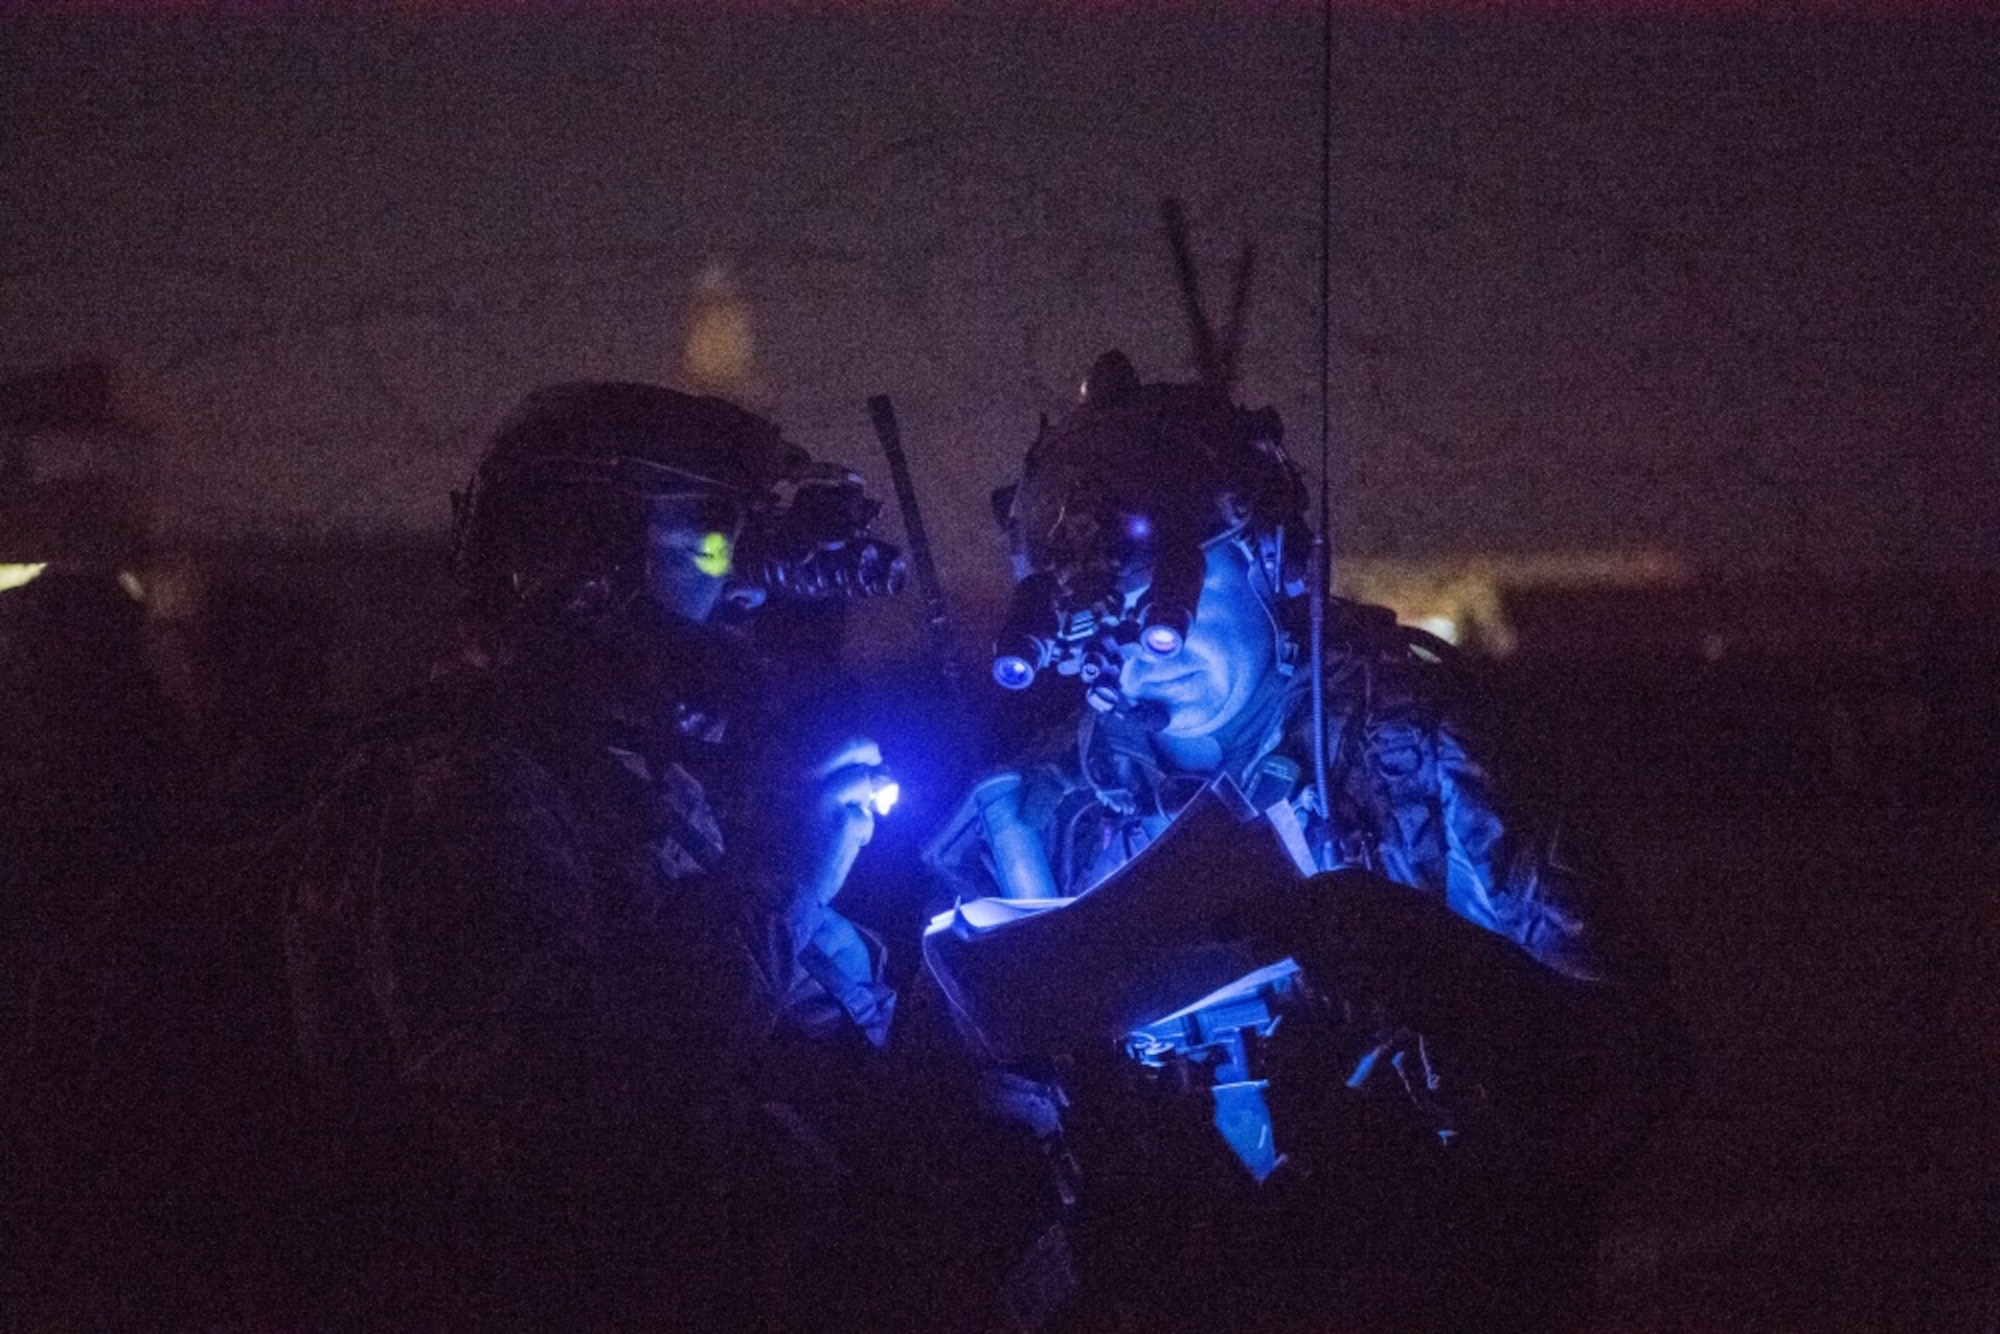 U.S. Airmen with the Air Force Special Operations Command discuss results of an airfield survey during operations in Faryab province, Afghanistan, Nov. 29, 2017. The Special Tactics Airmen ensure access to traditional airfields and landing strips to increase the operational reach of coalition and Afghan aircraft for reconnaissance, troop delivery and strategic air support operations. (U.S. Air Force photo by Staff Sgt. Doug Ellis)